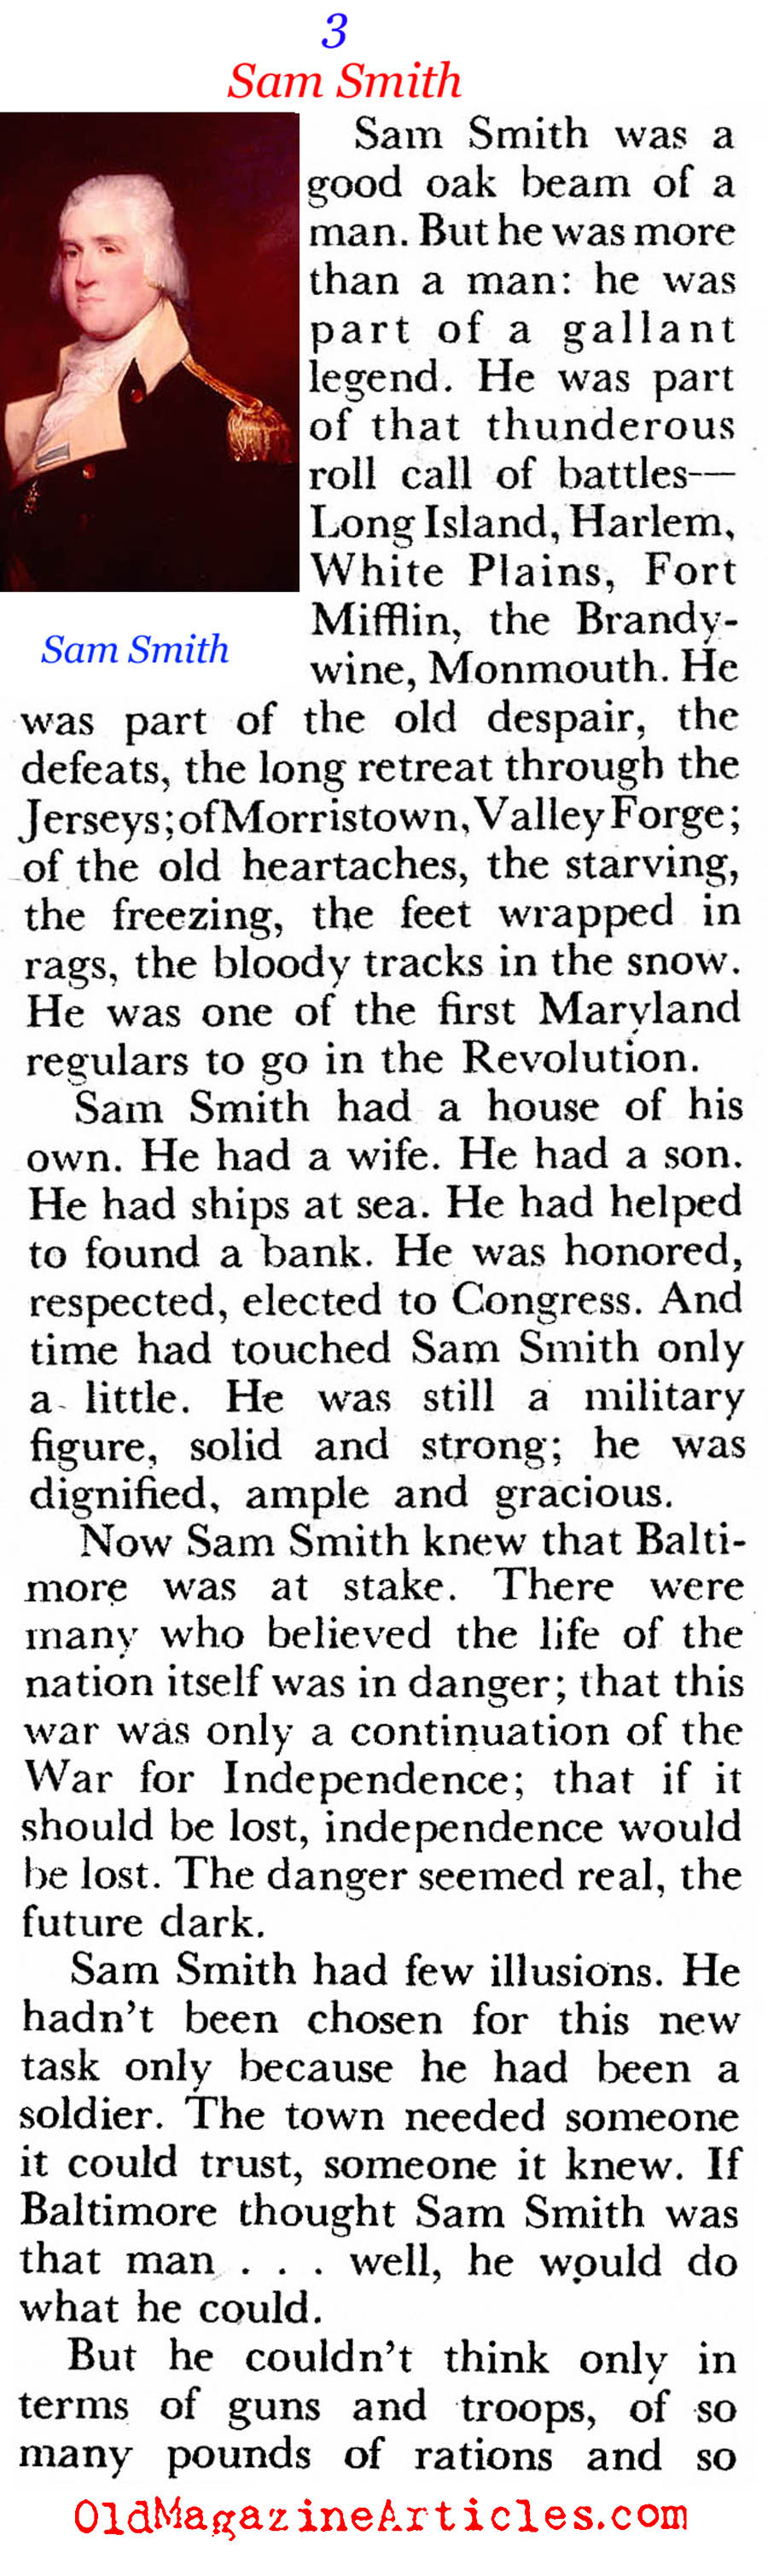 The Back Story of the Star-Spangled Banner (Coronet Magazine, 1948)